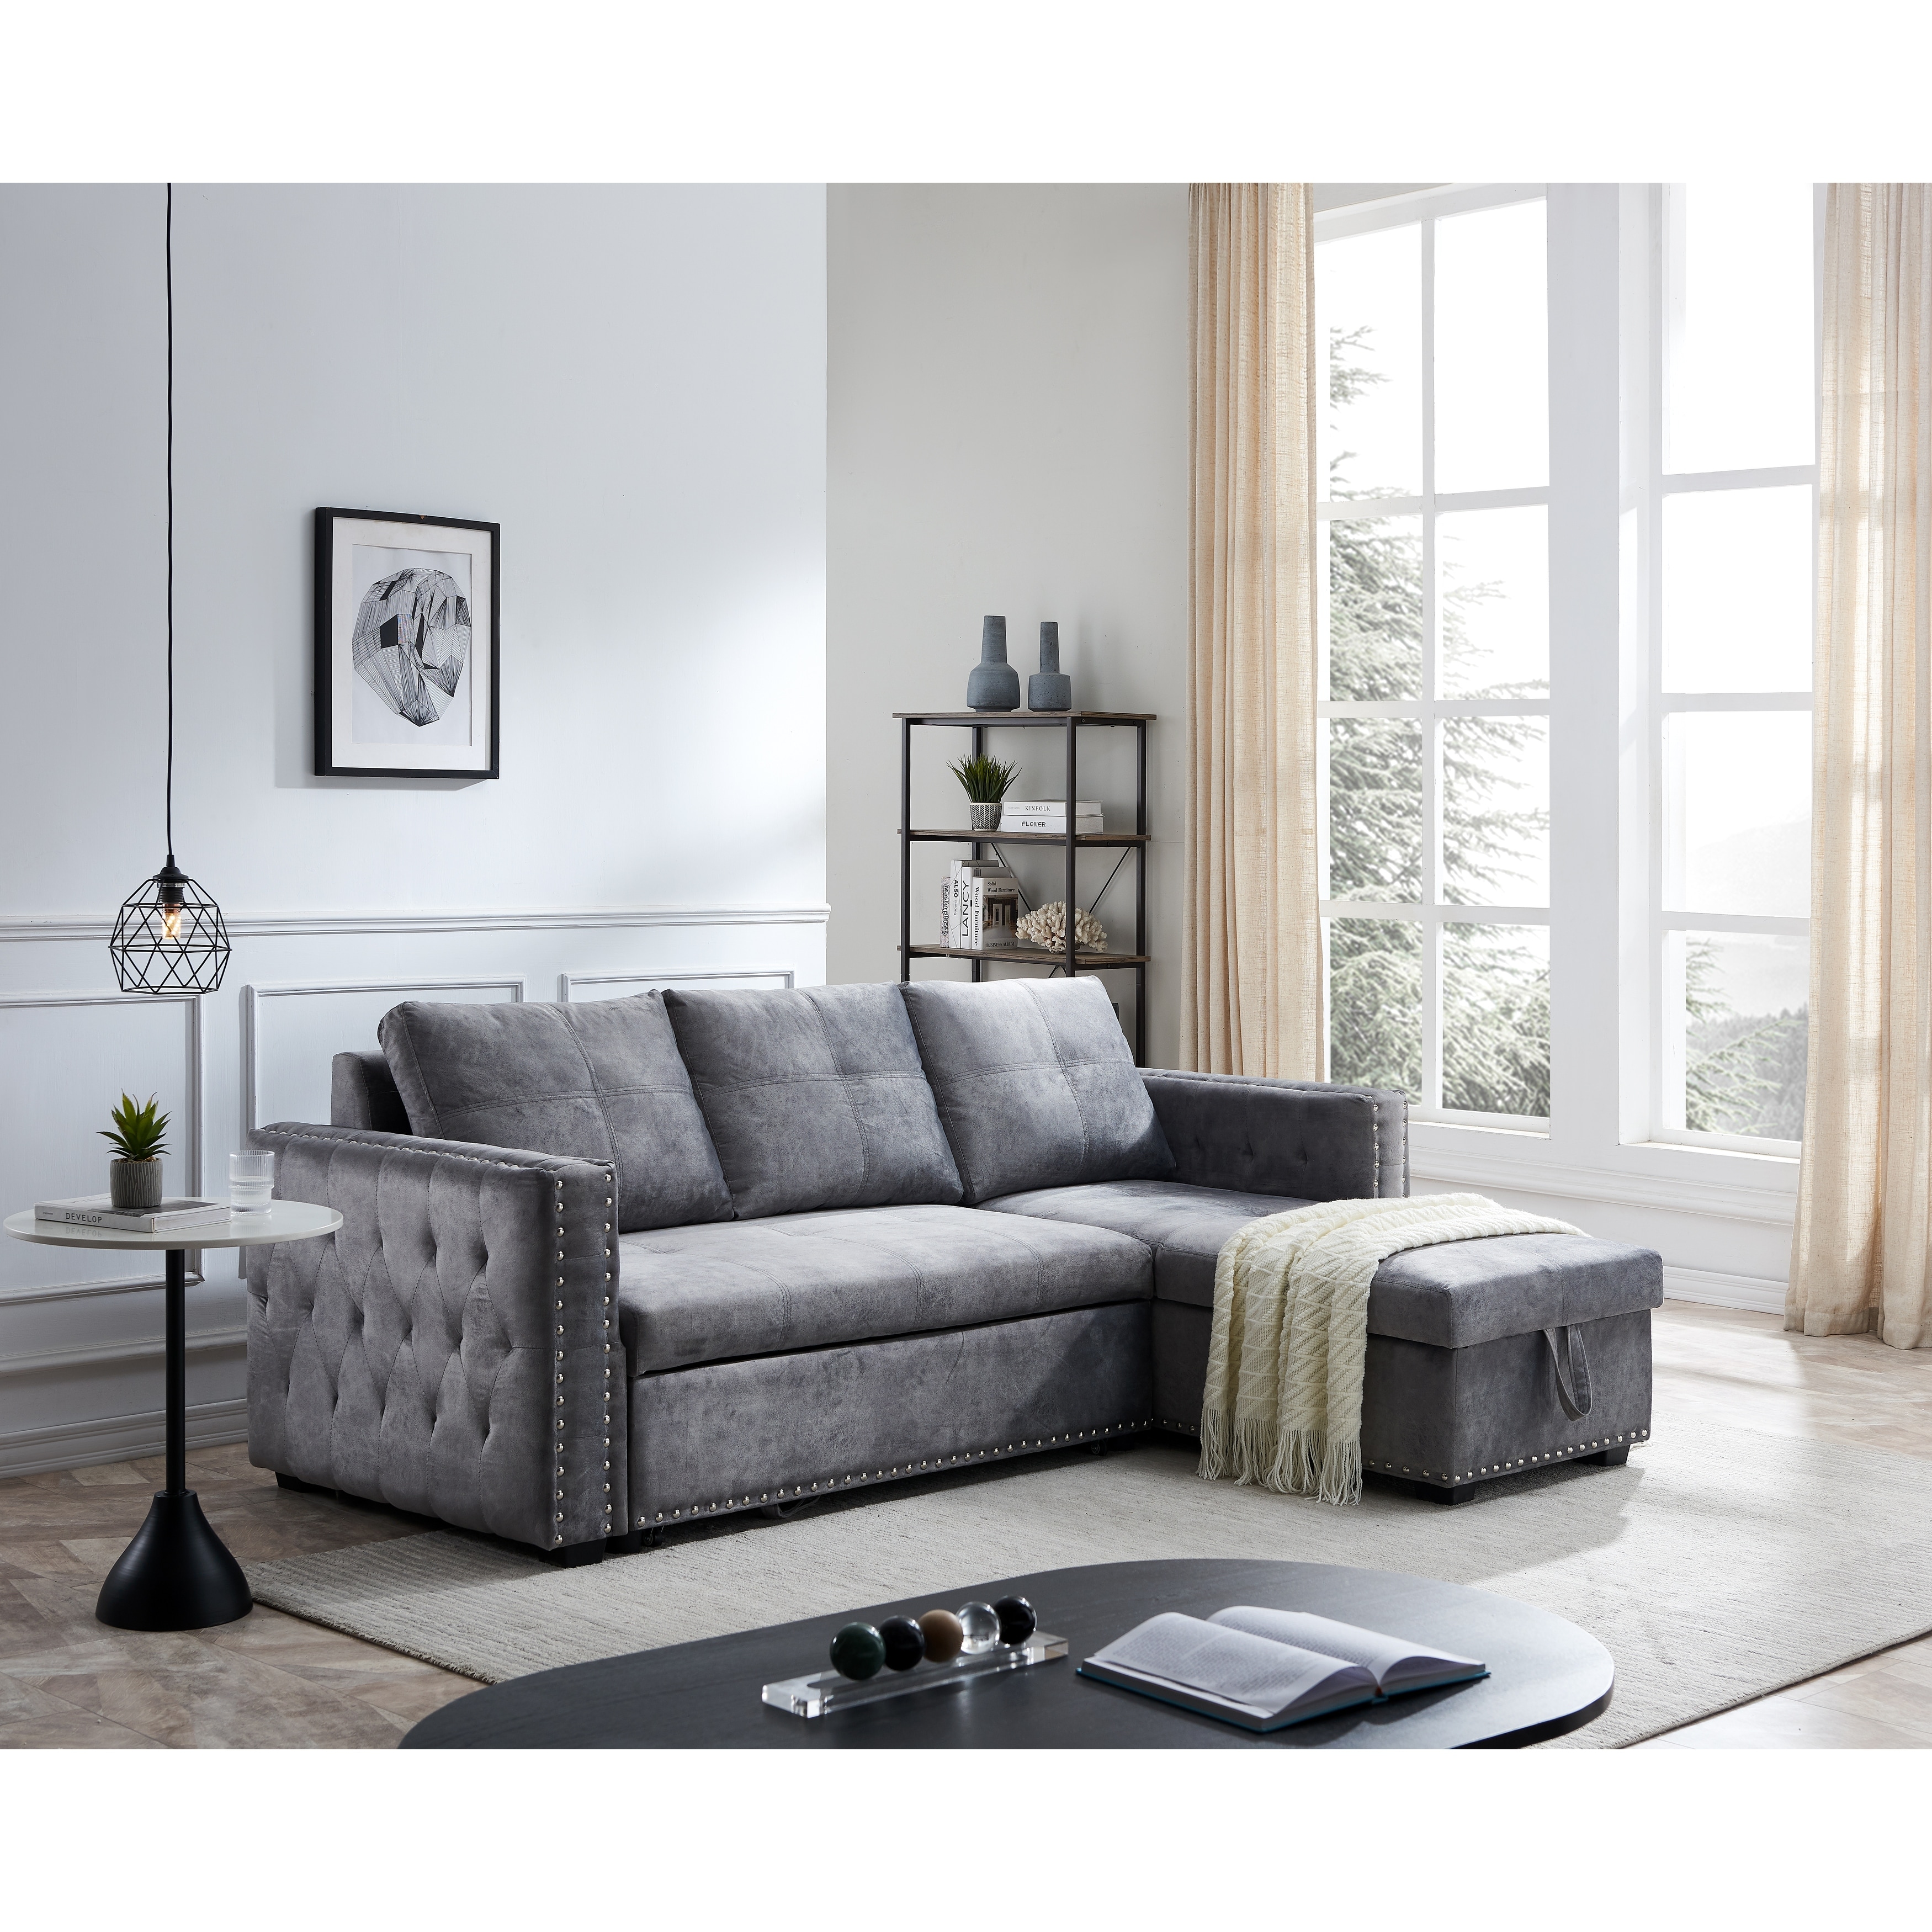 Sectional Velvet Sofa With Pulled Out Sofa Bed  Reversible Storage Chaise